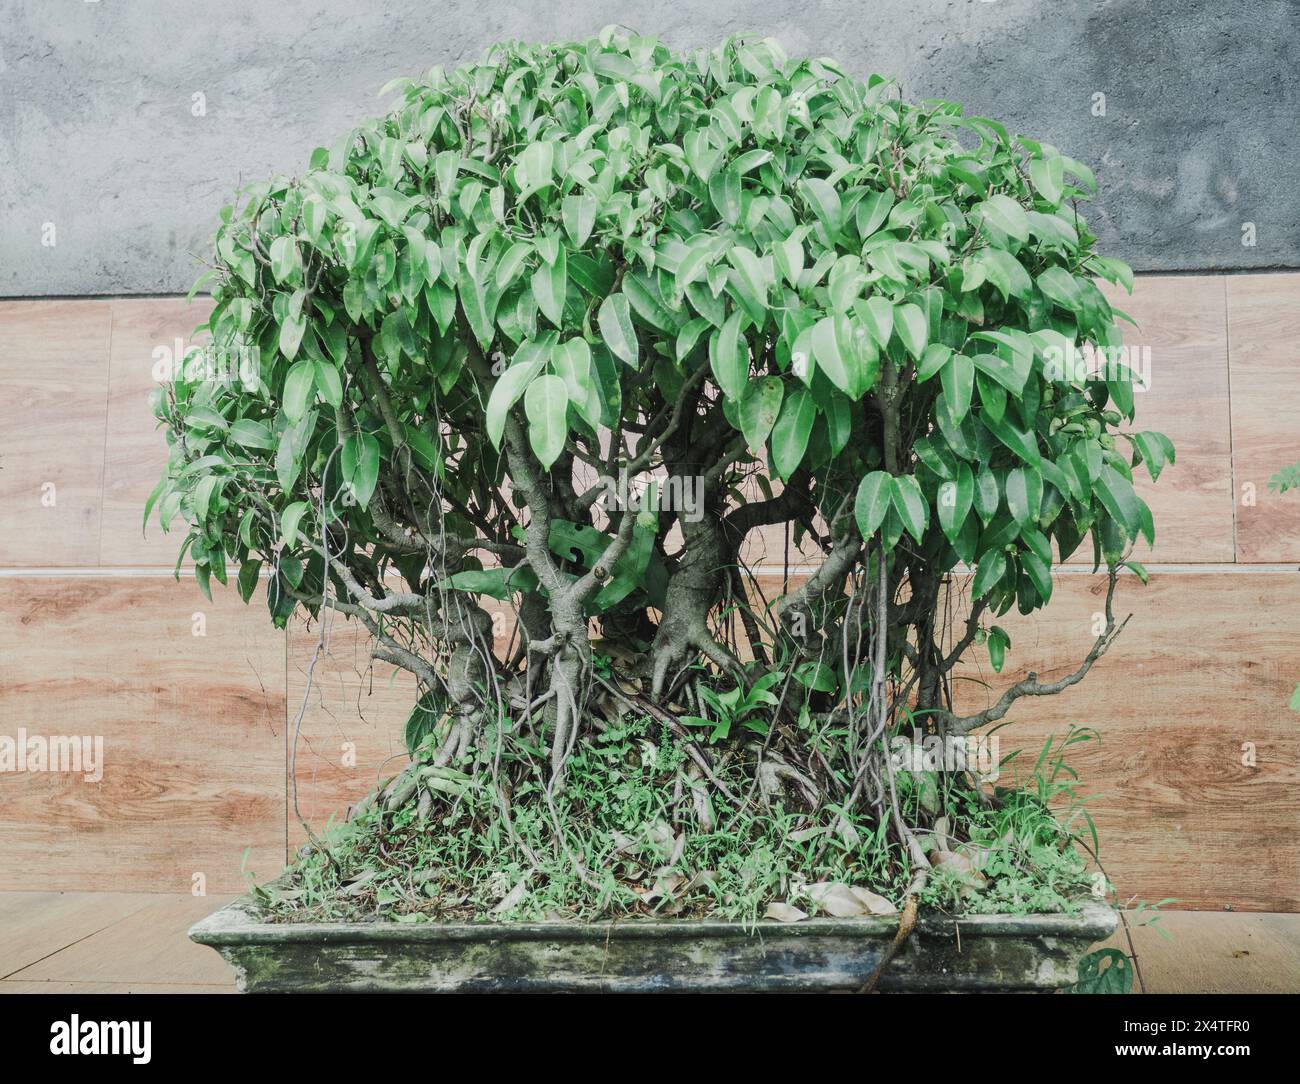 Beautiful Banyan Tree bonsai, an oriental style ornament seen in Bali, Indonesia. One of the trees is used as bonsai for hobbyists. Stock Photo